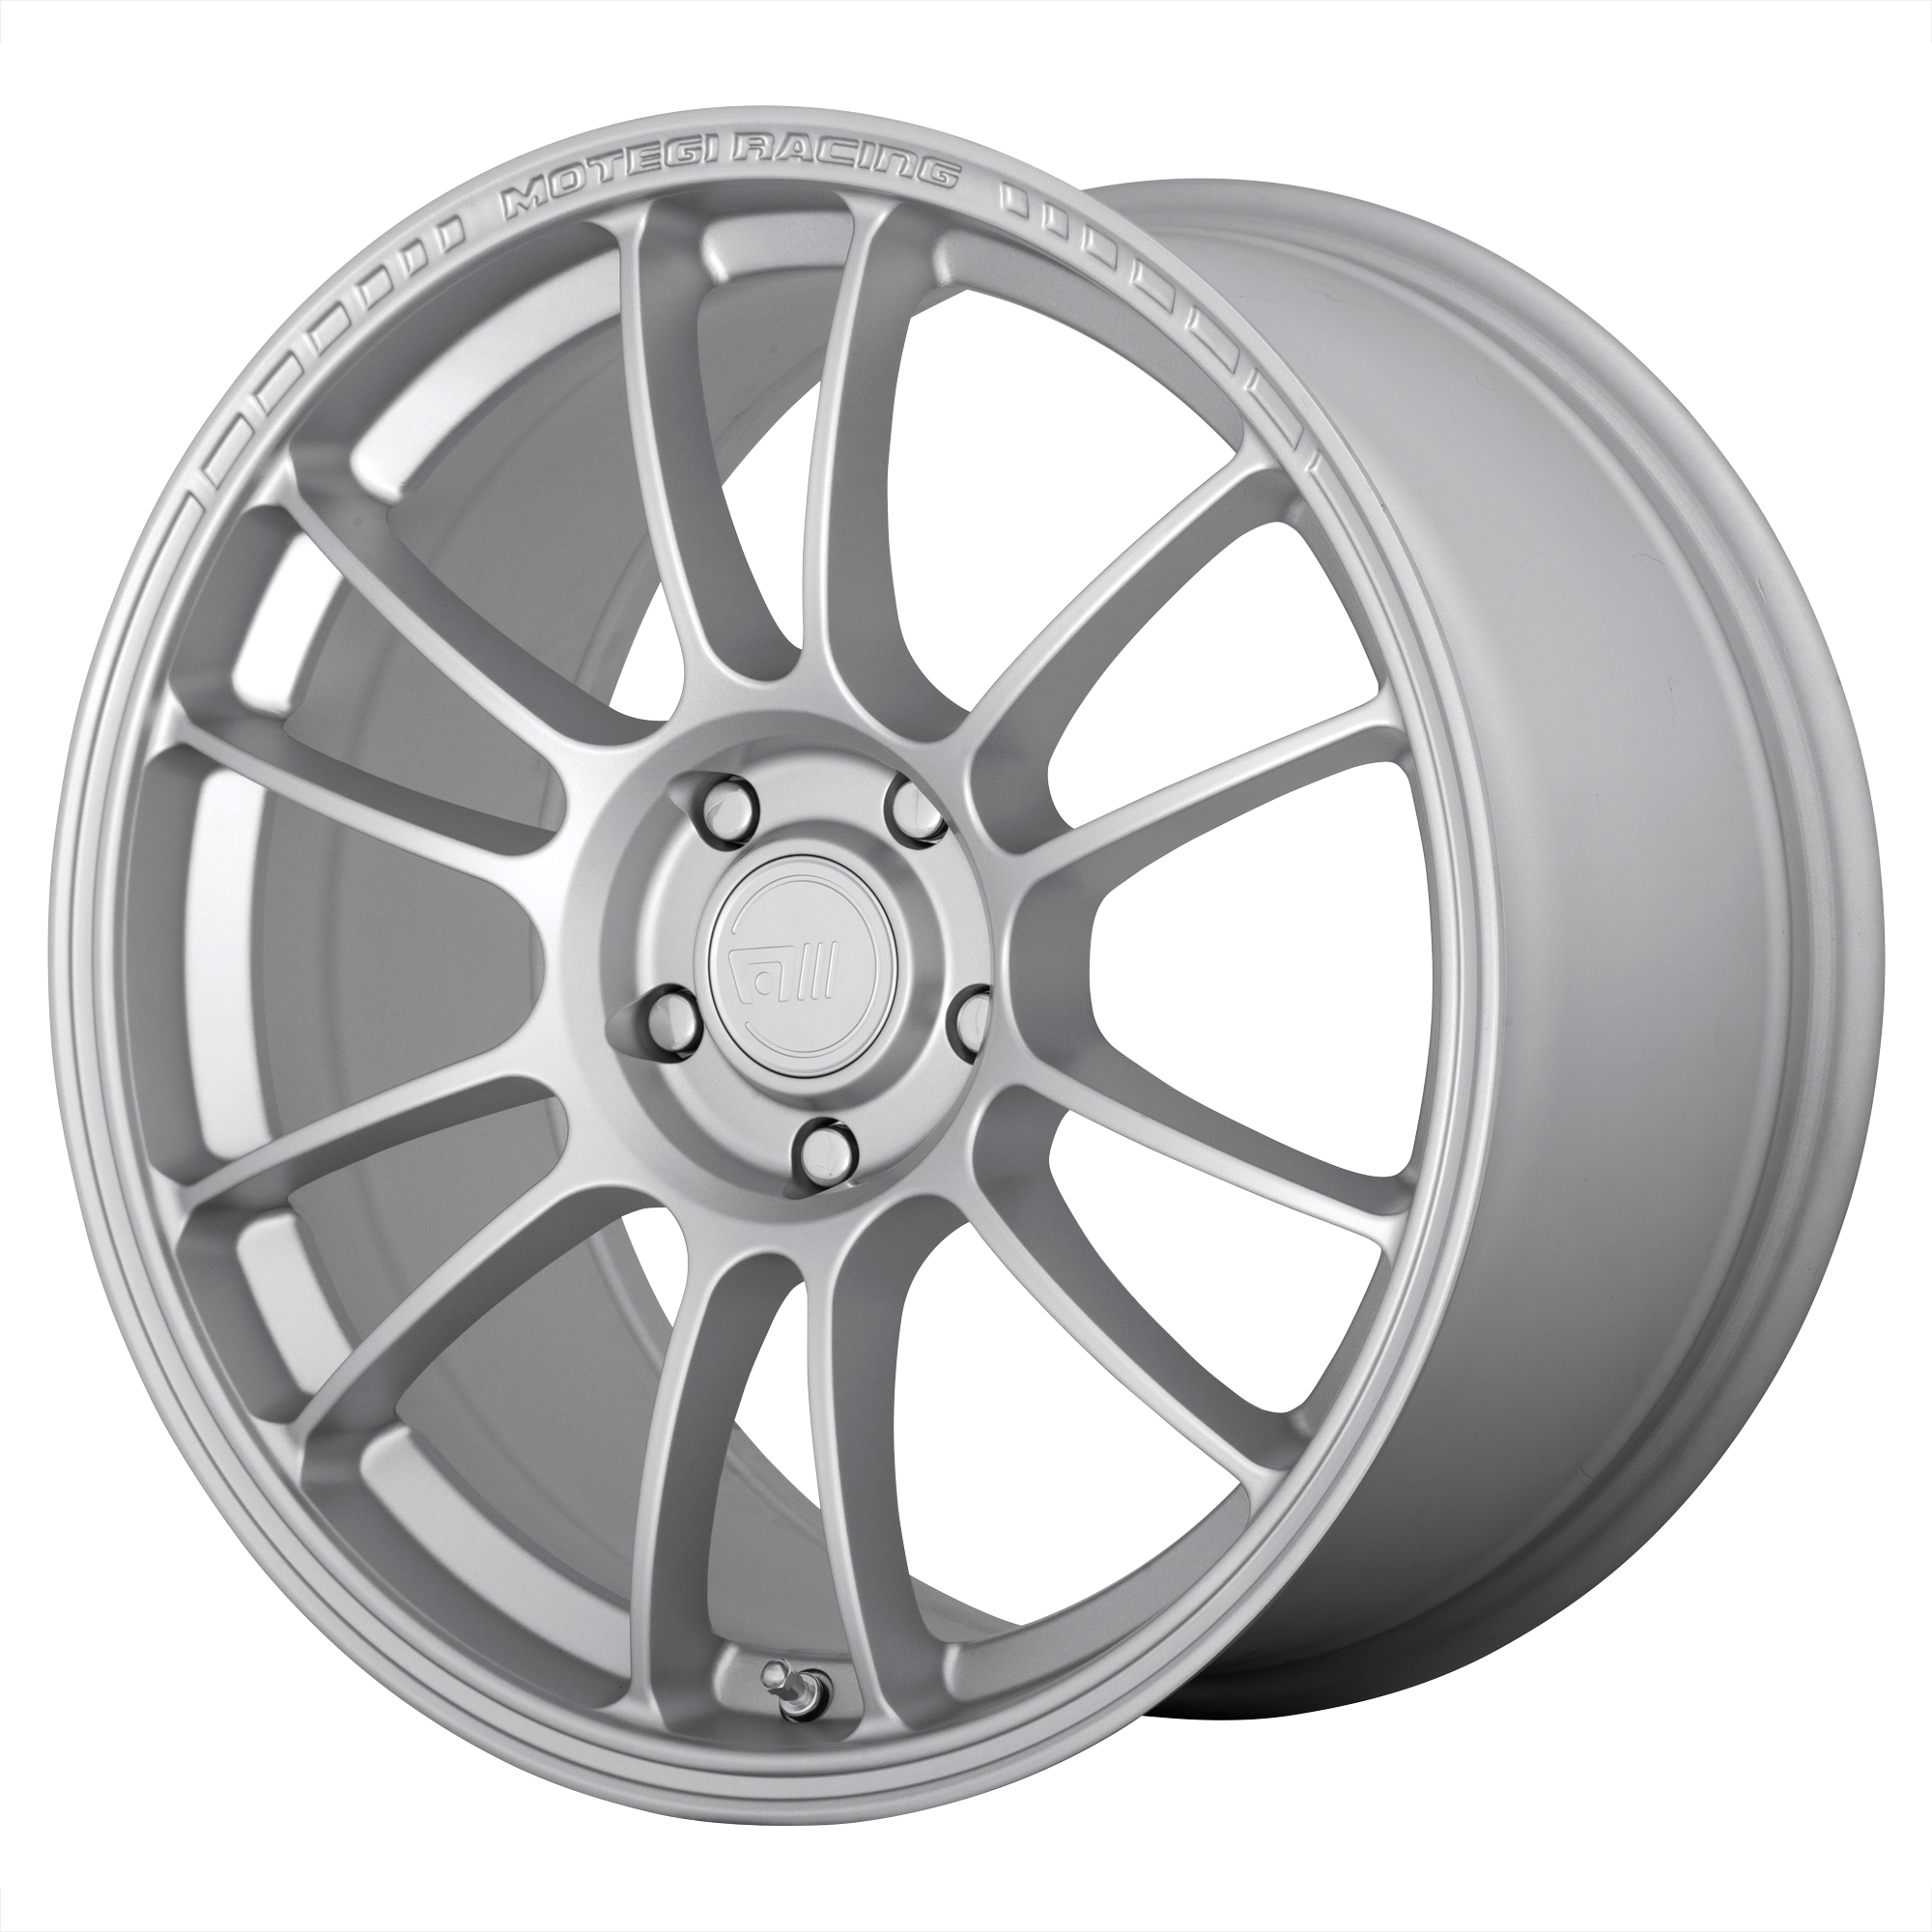 SS6 18x9.5 5x114.30 HYPER SILVER (35 mm) - Tires and Engine Performance